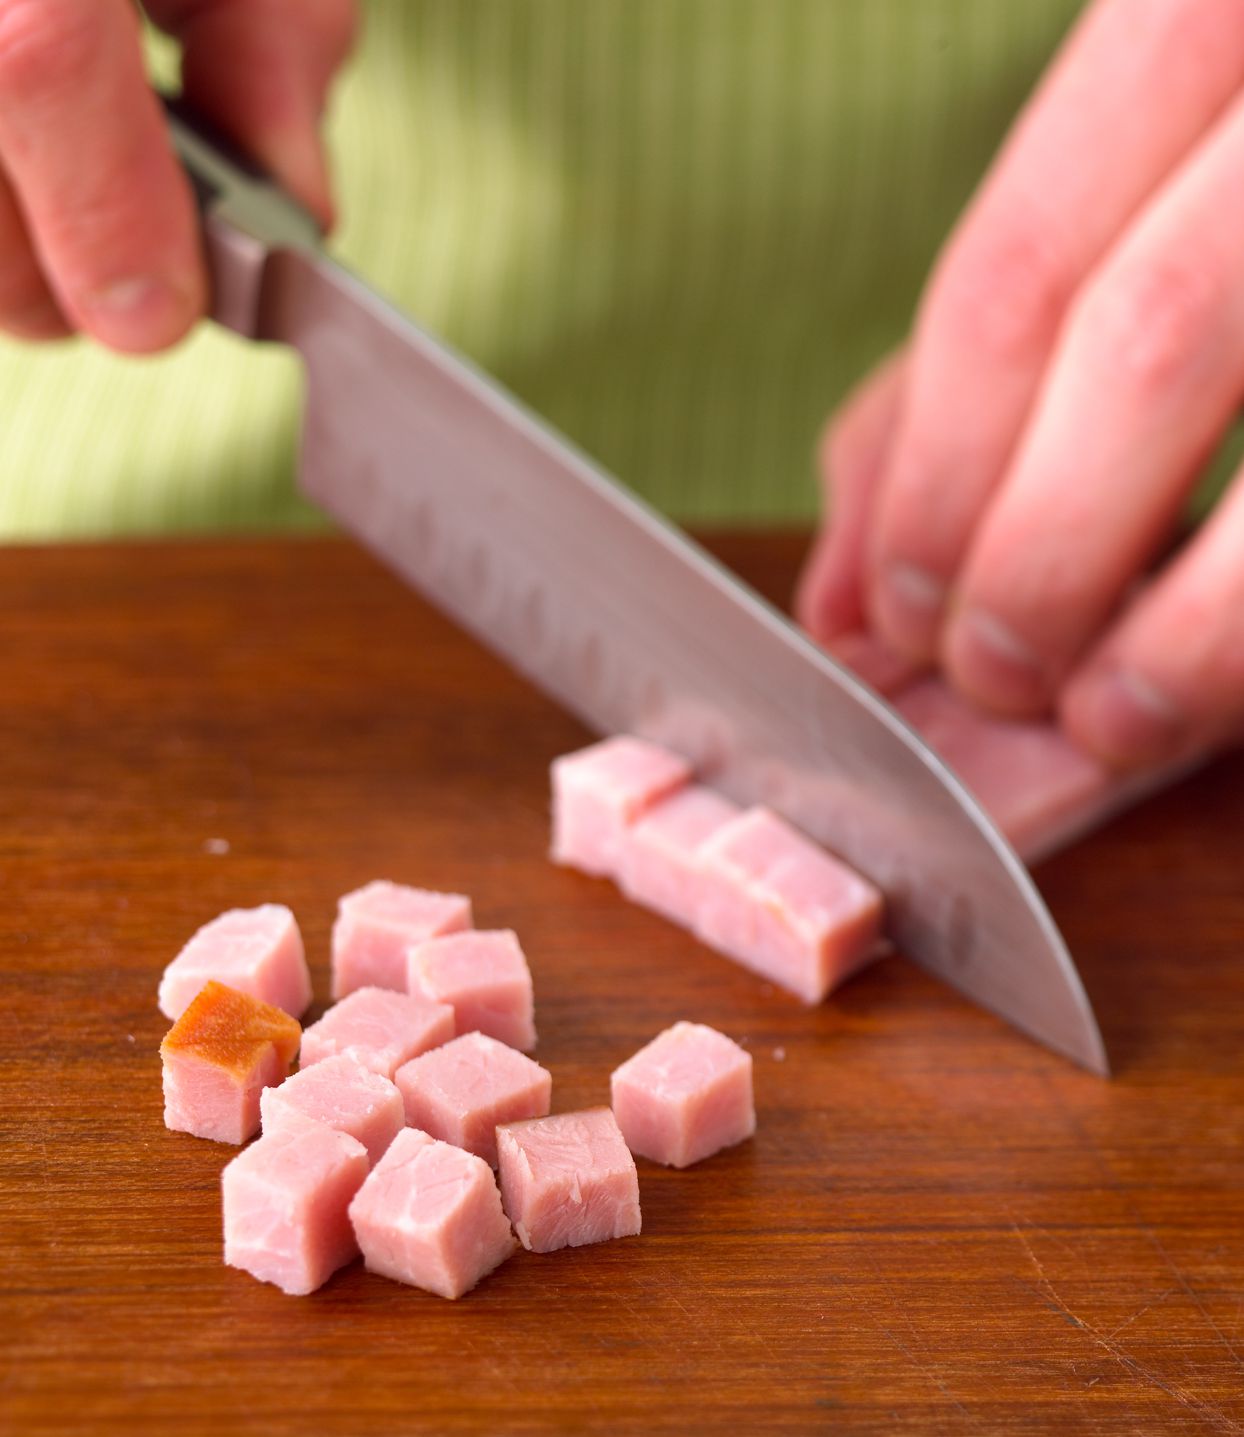 Dicing ham with a chef’s knife on a wooden cutting board